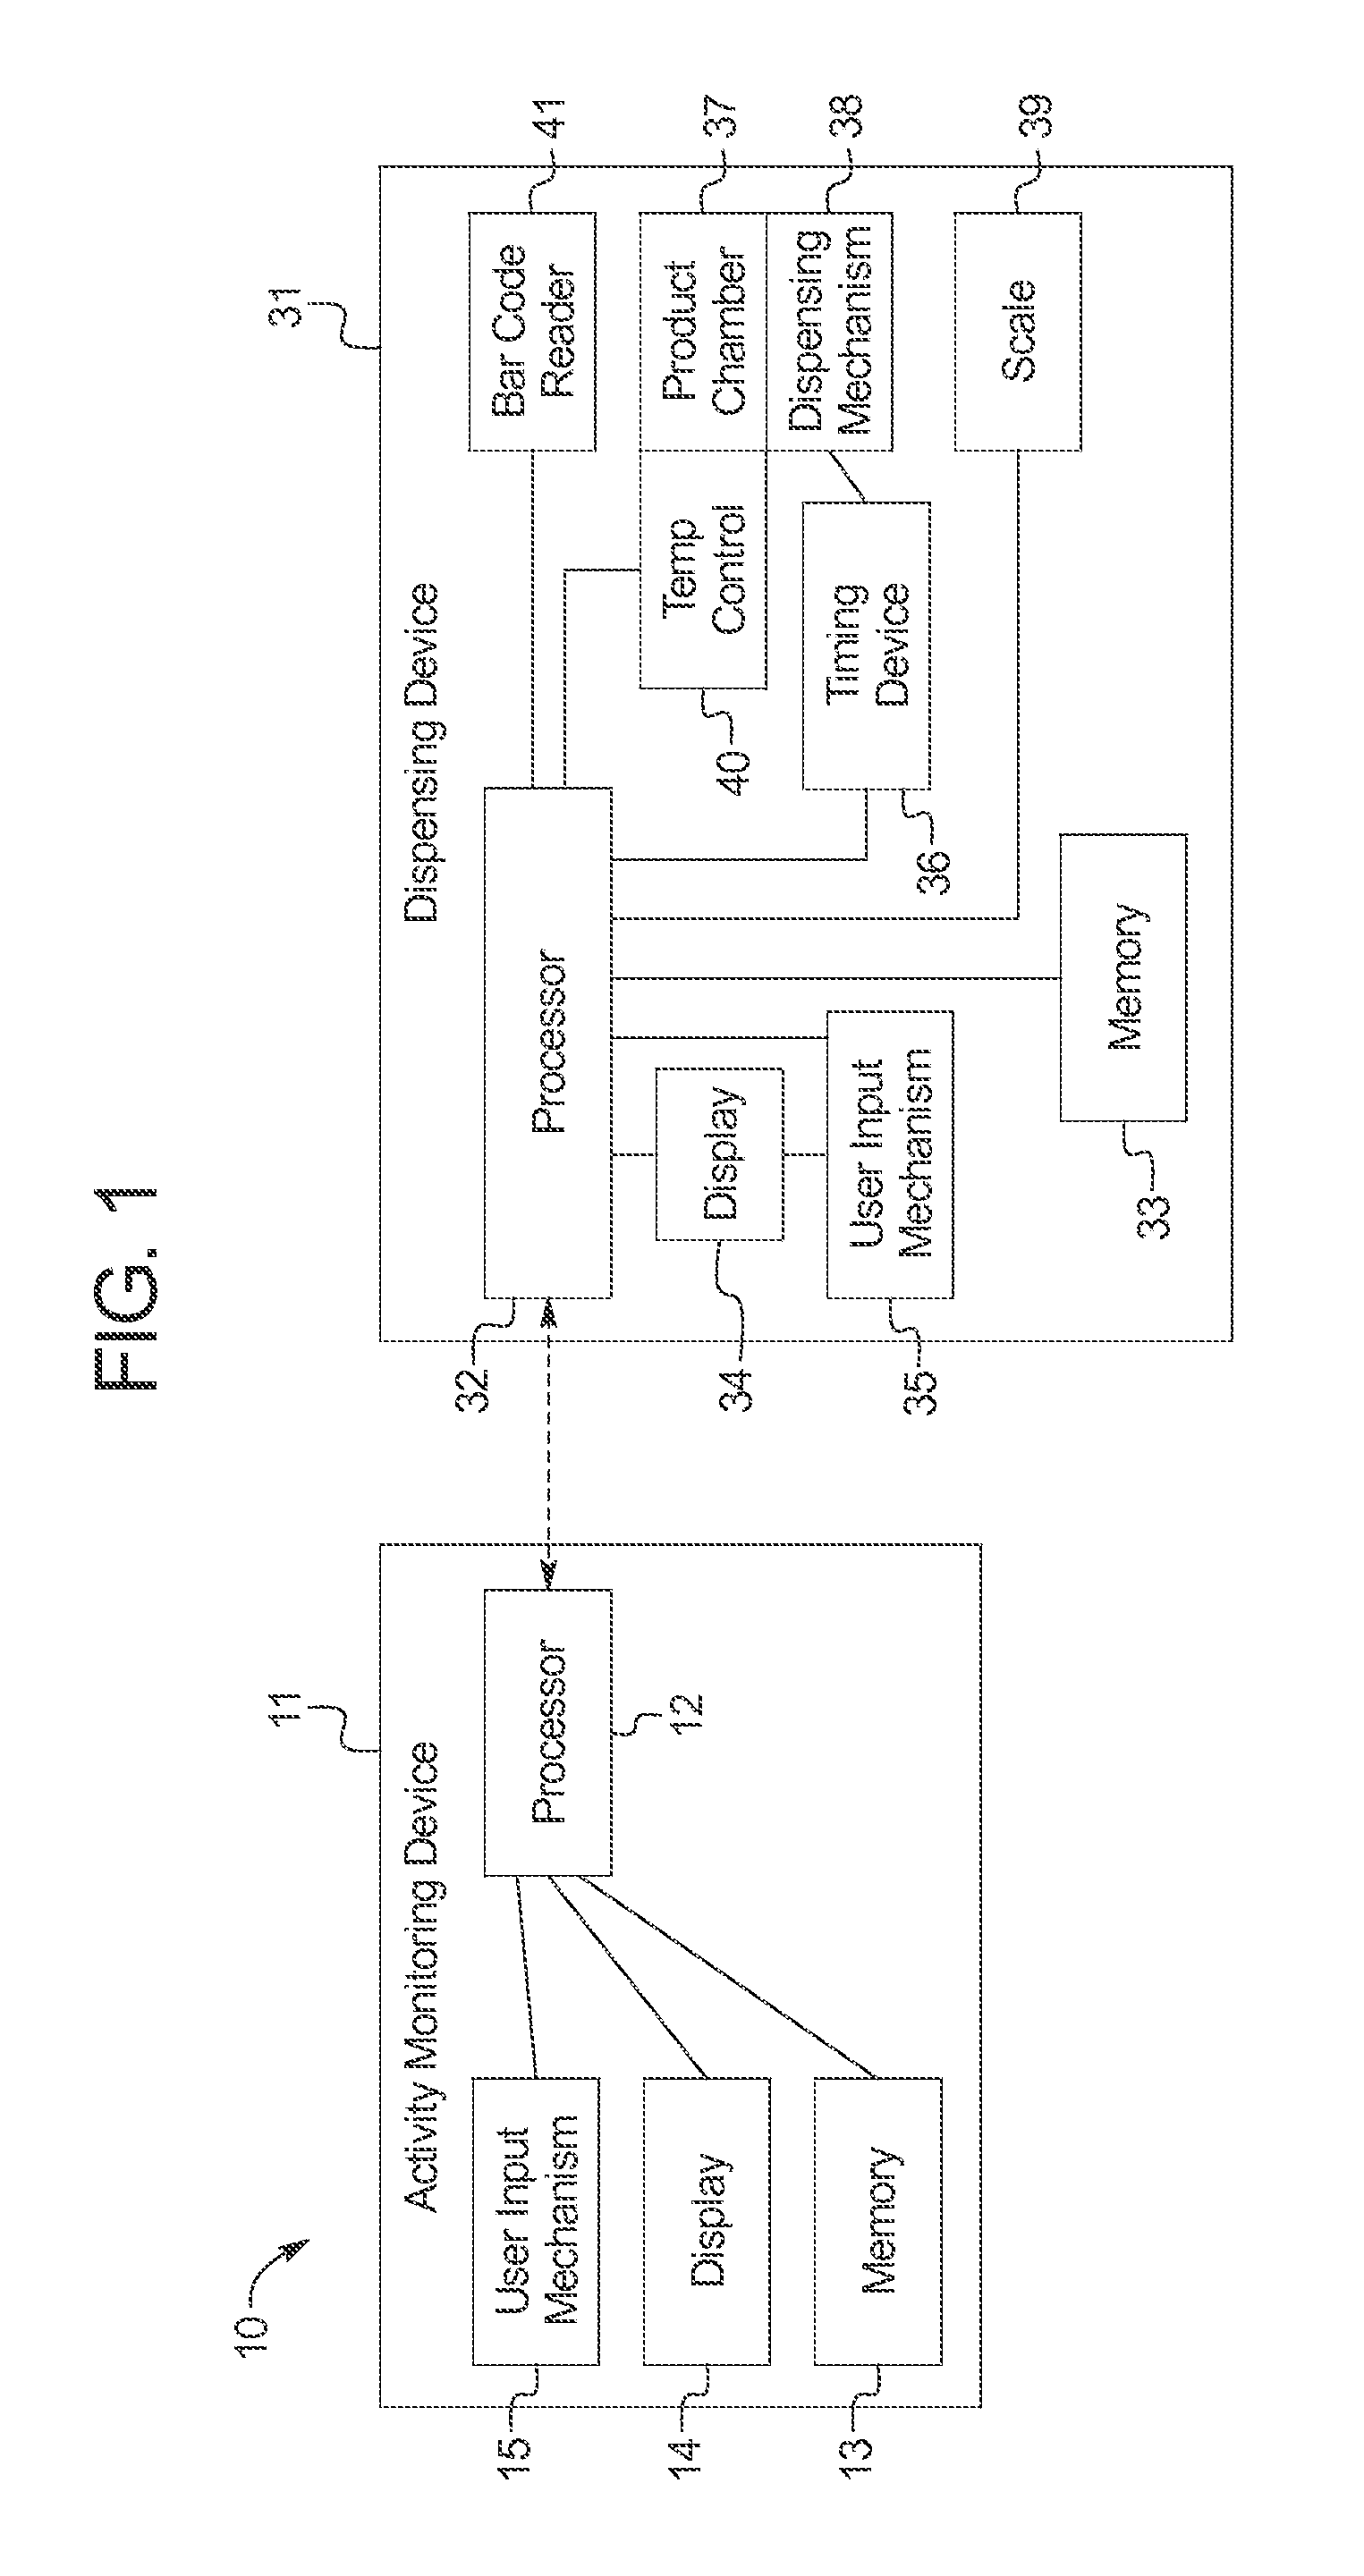 Systems and methods for providing products to animals